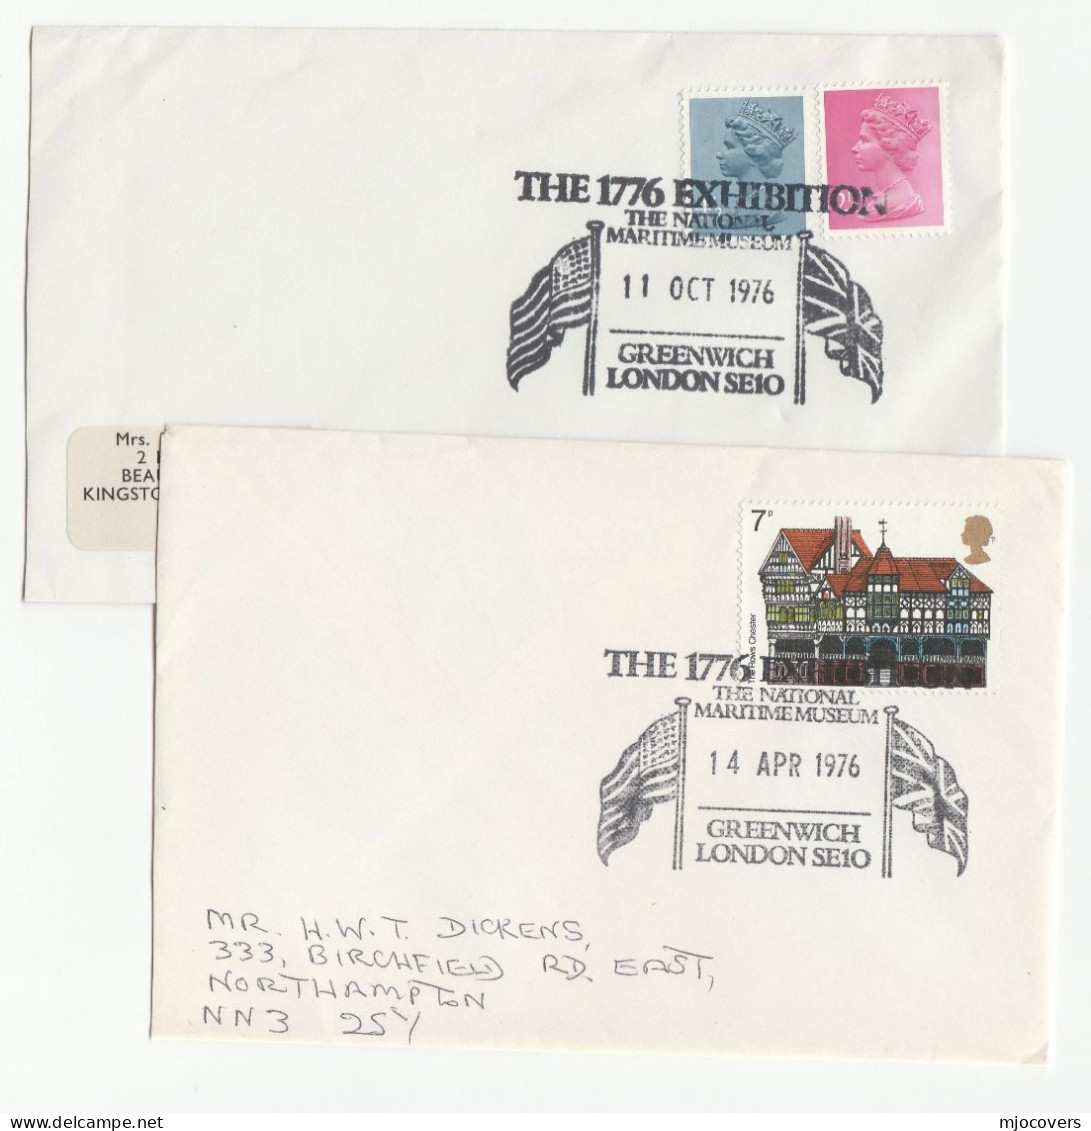 Pair Diff 1776 EXHIBITION EVENT Covers GREENWICH GB 14th Apr& 11 Oc 1976 FLAG USA Independence BICENTENNIAL Stamps Cover - Indépendance USA